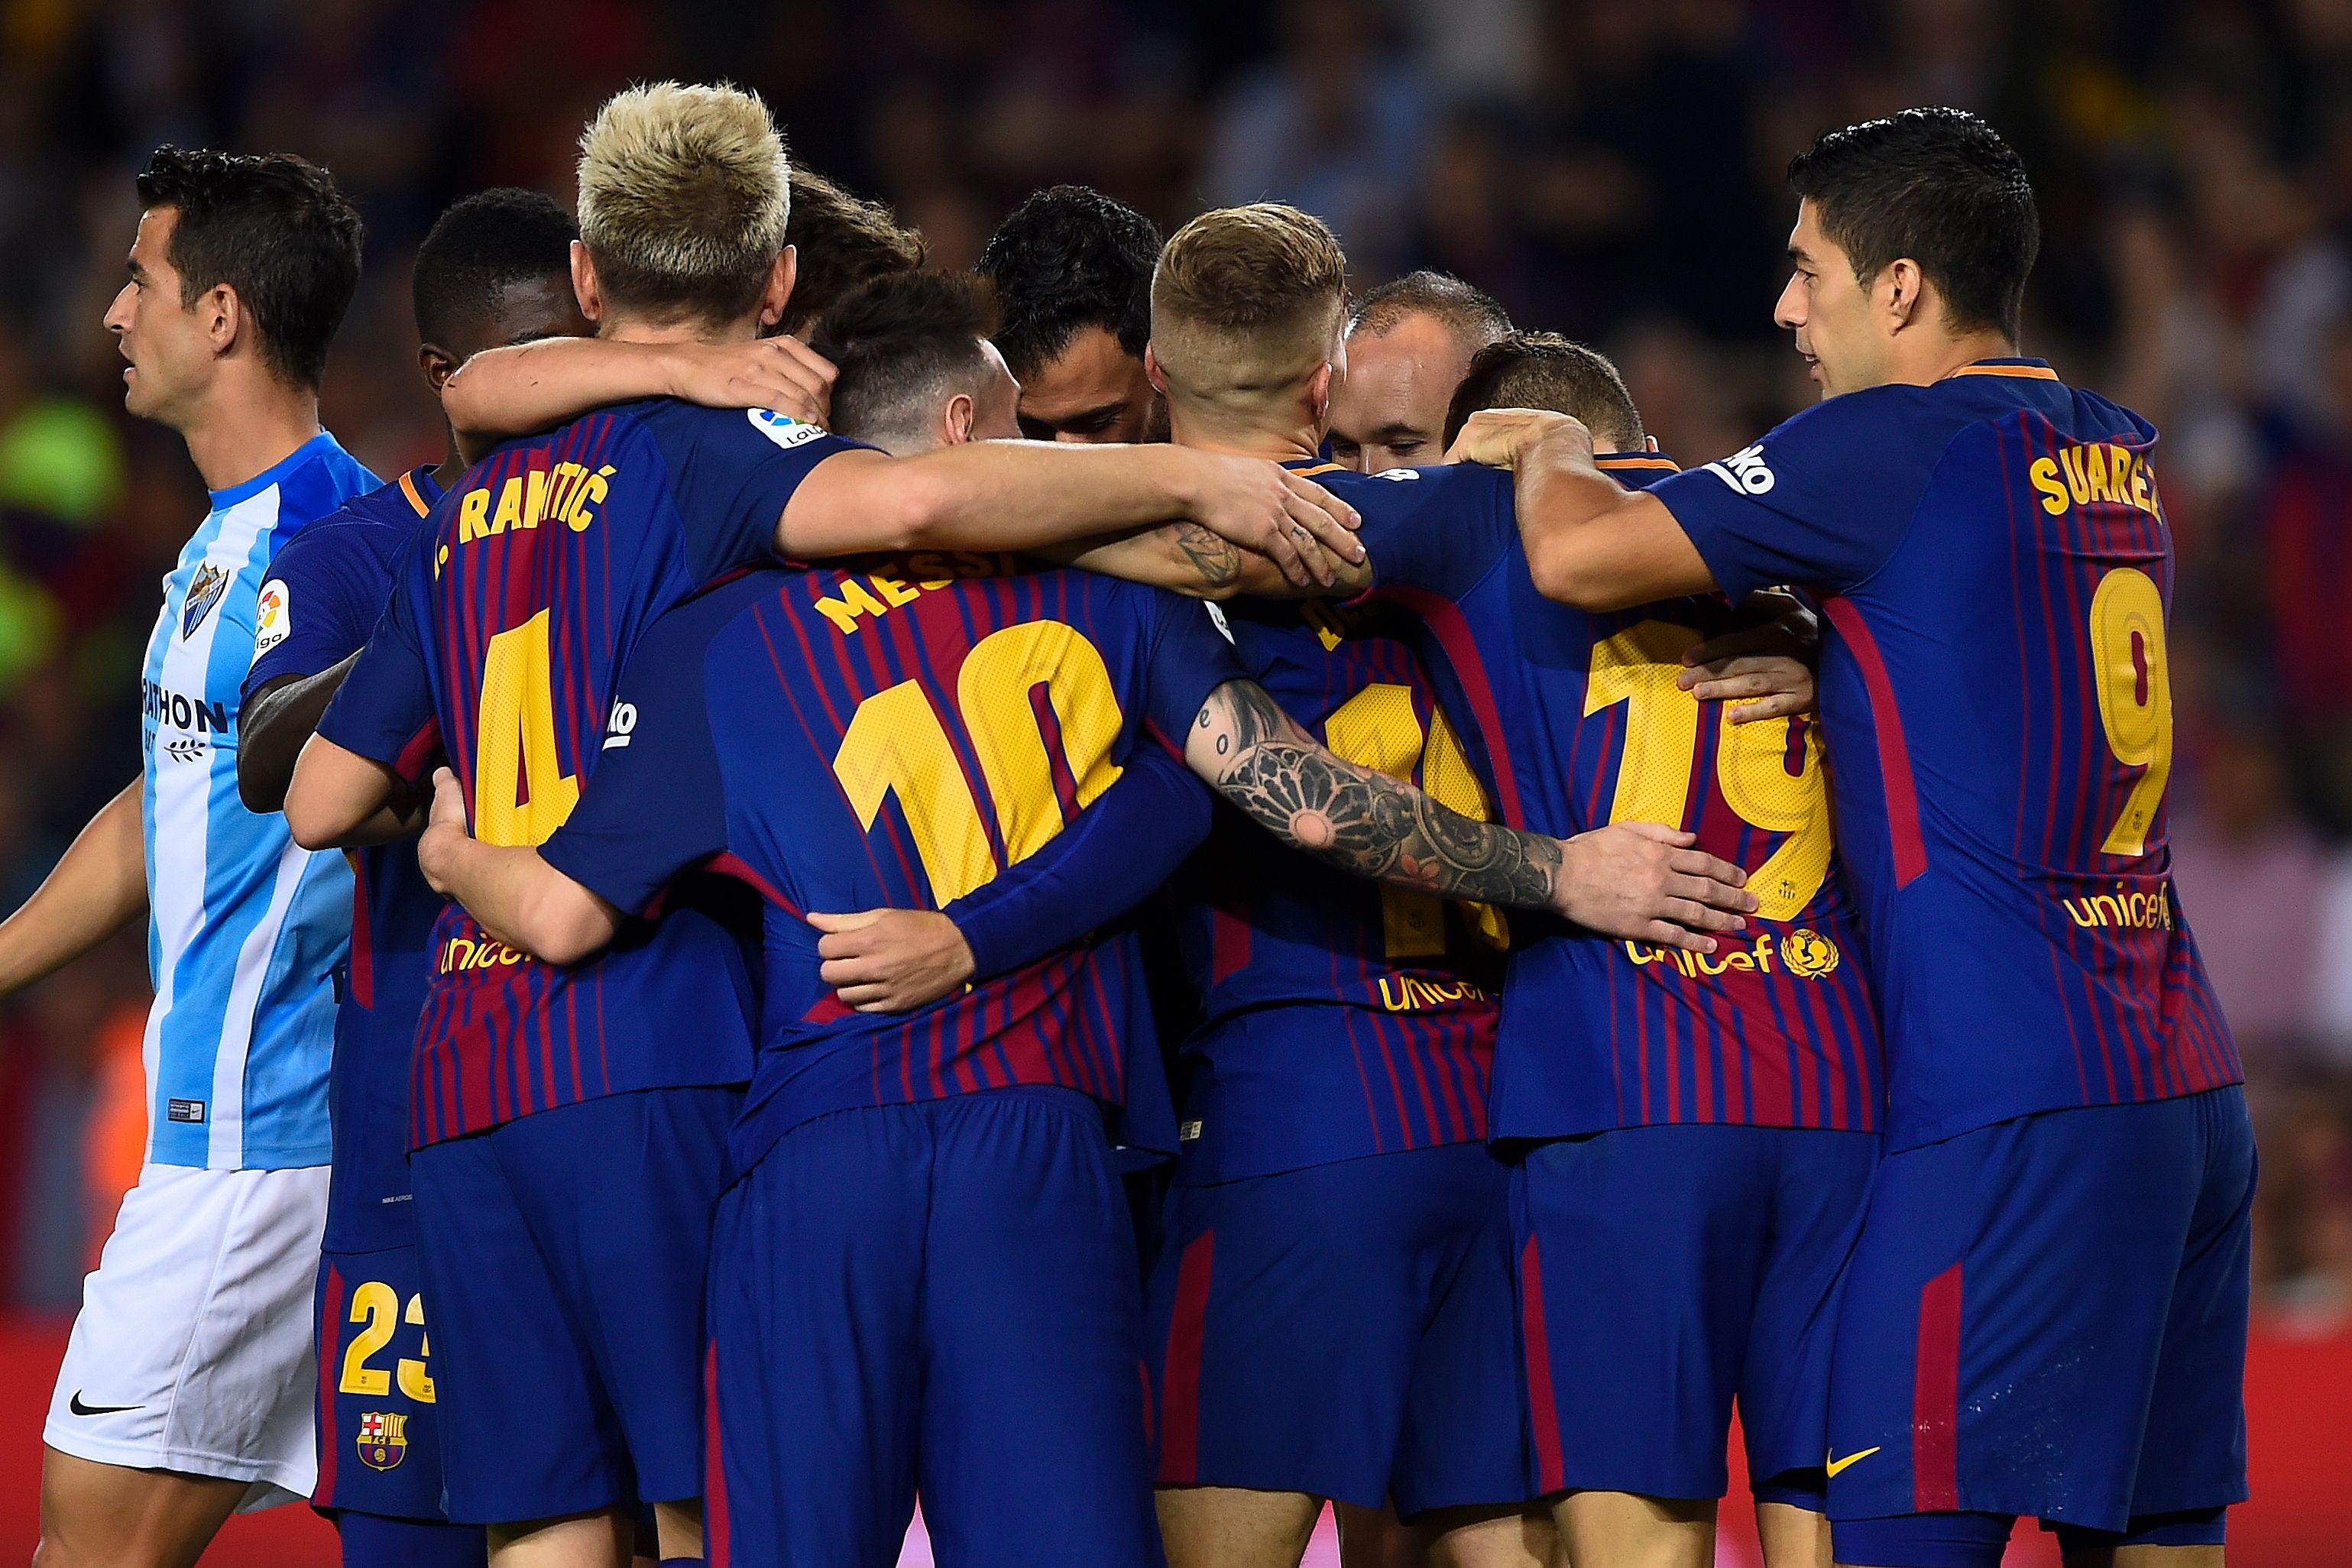 Barcelona's players celebrate a goal during the Spanish league football match FC Barcelona vs Malaga CF at the Camp Nou stadium in Barcelona on October 21, 2017. / AFP PHOTO / Josep LAGO        (Photo credit should read JOSEP LAGO/AFP/Getty Images)